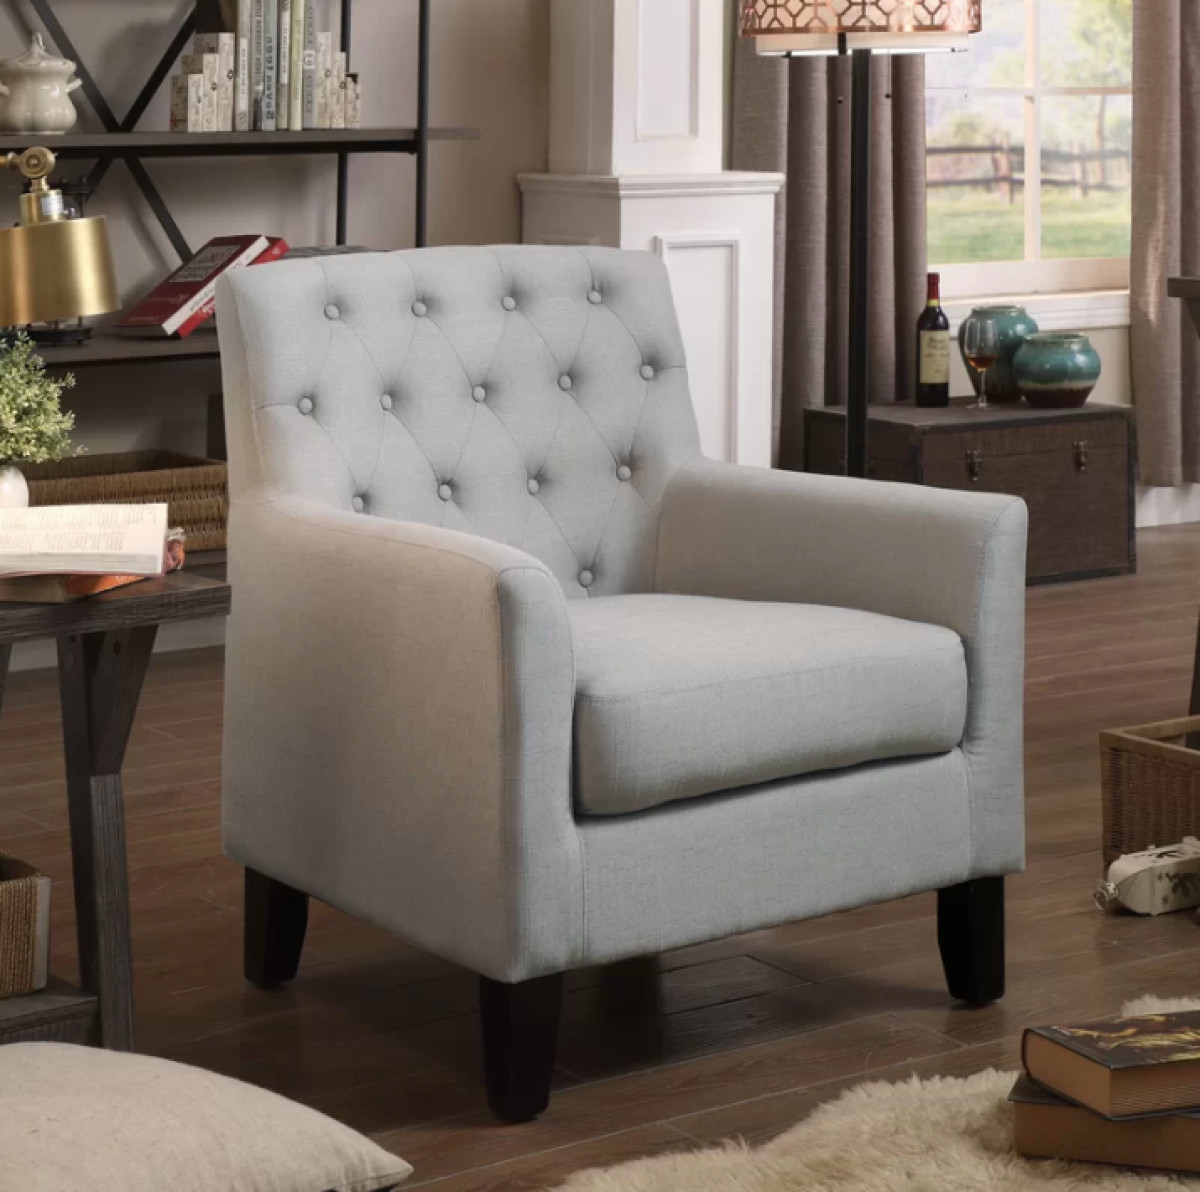 Living Room Chairs Clearance
 Wayfair End of Year Clearance Sale = Up to f Living